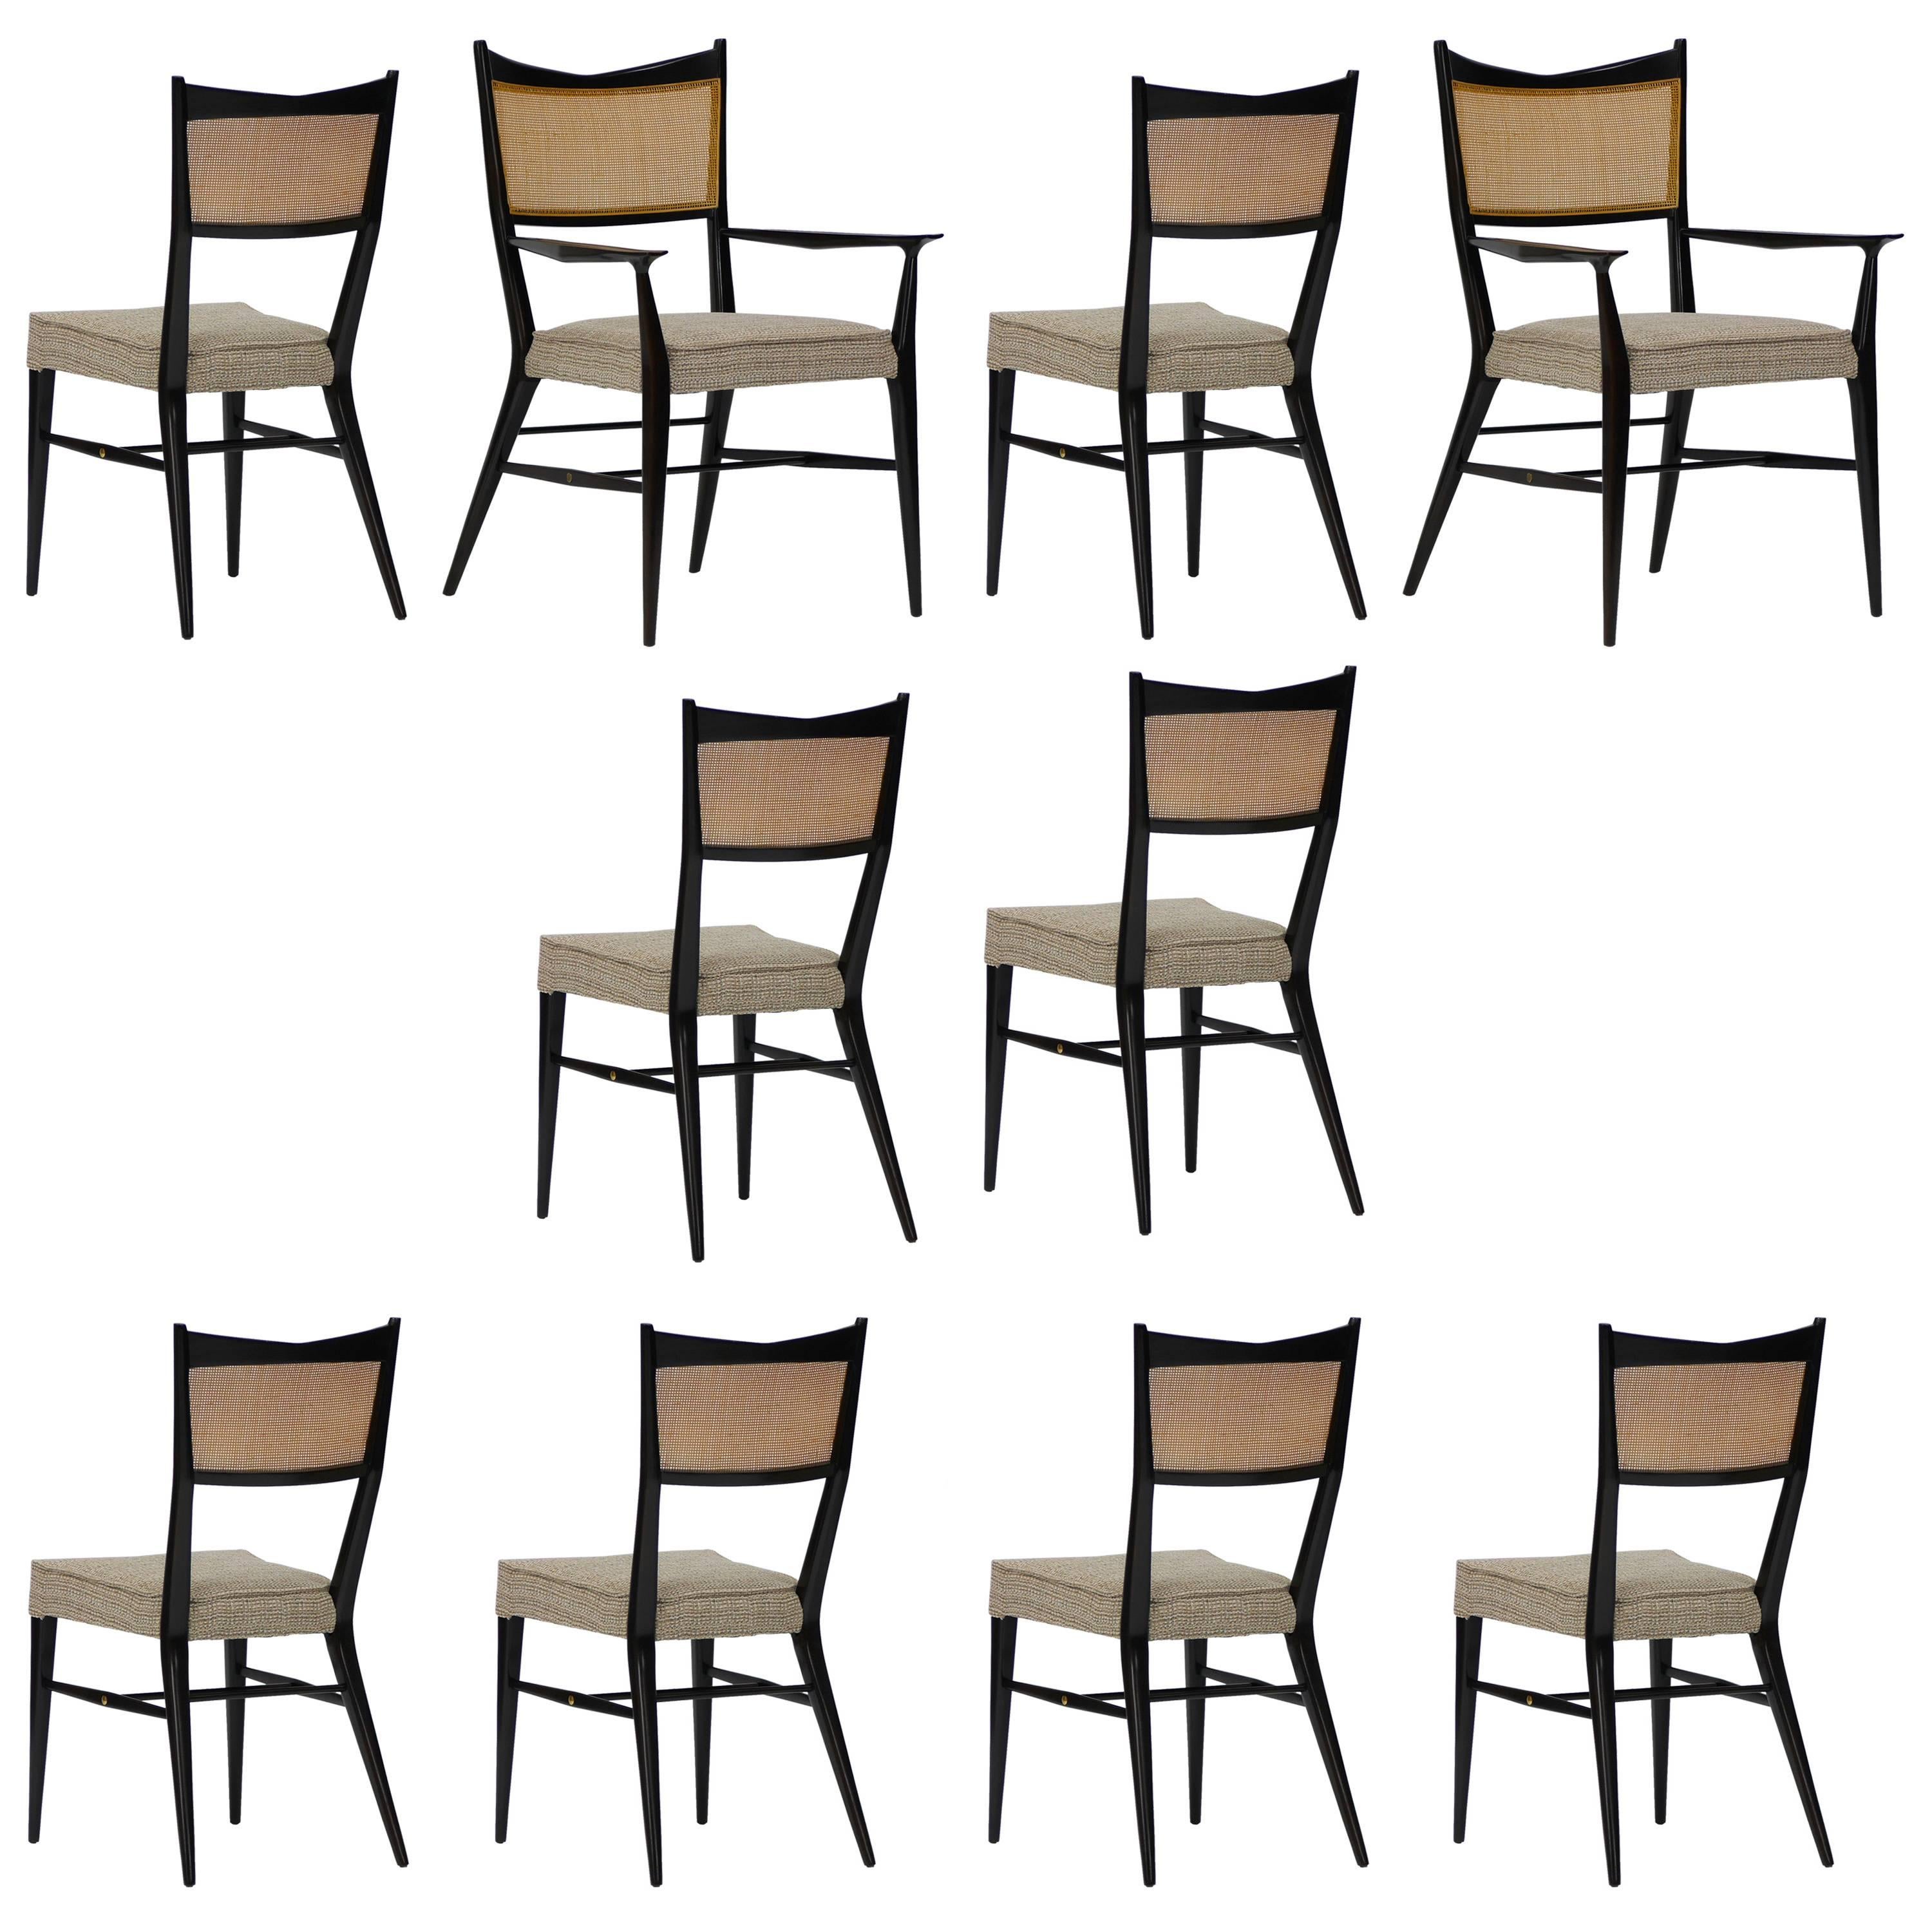 Ten Paul McCobb Irwin Collection Dining Chairs